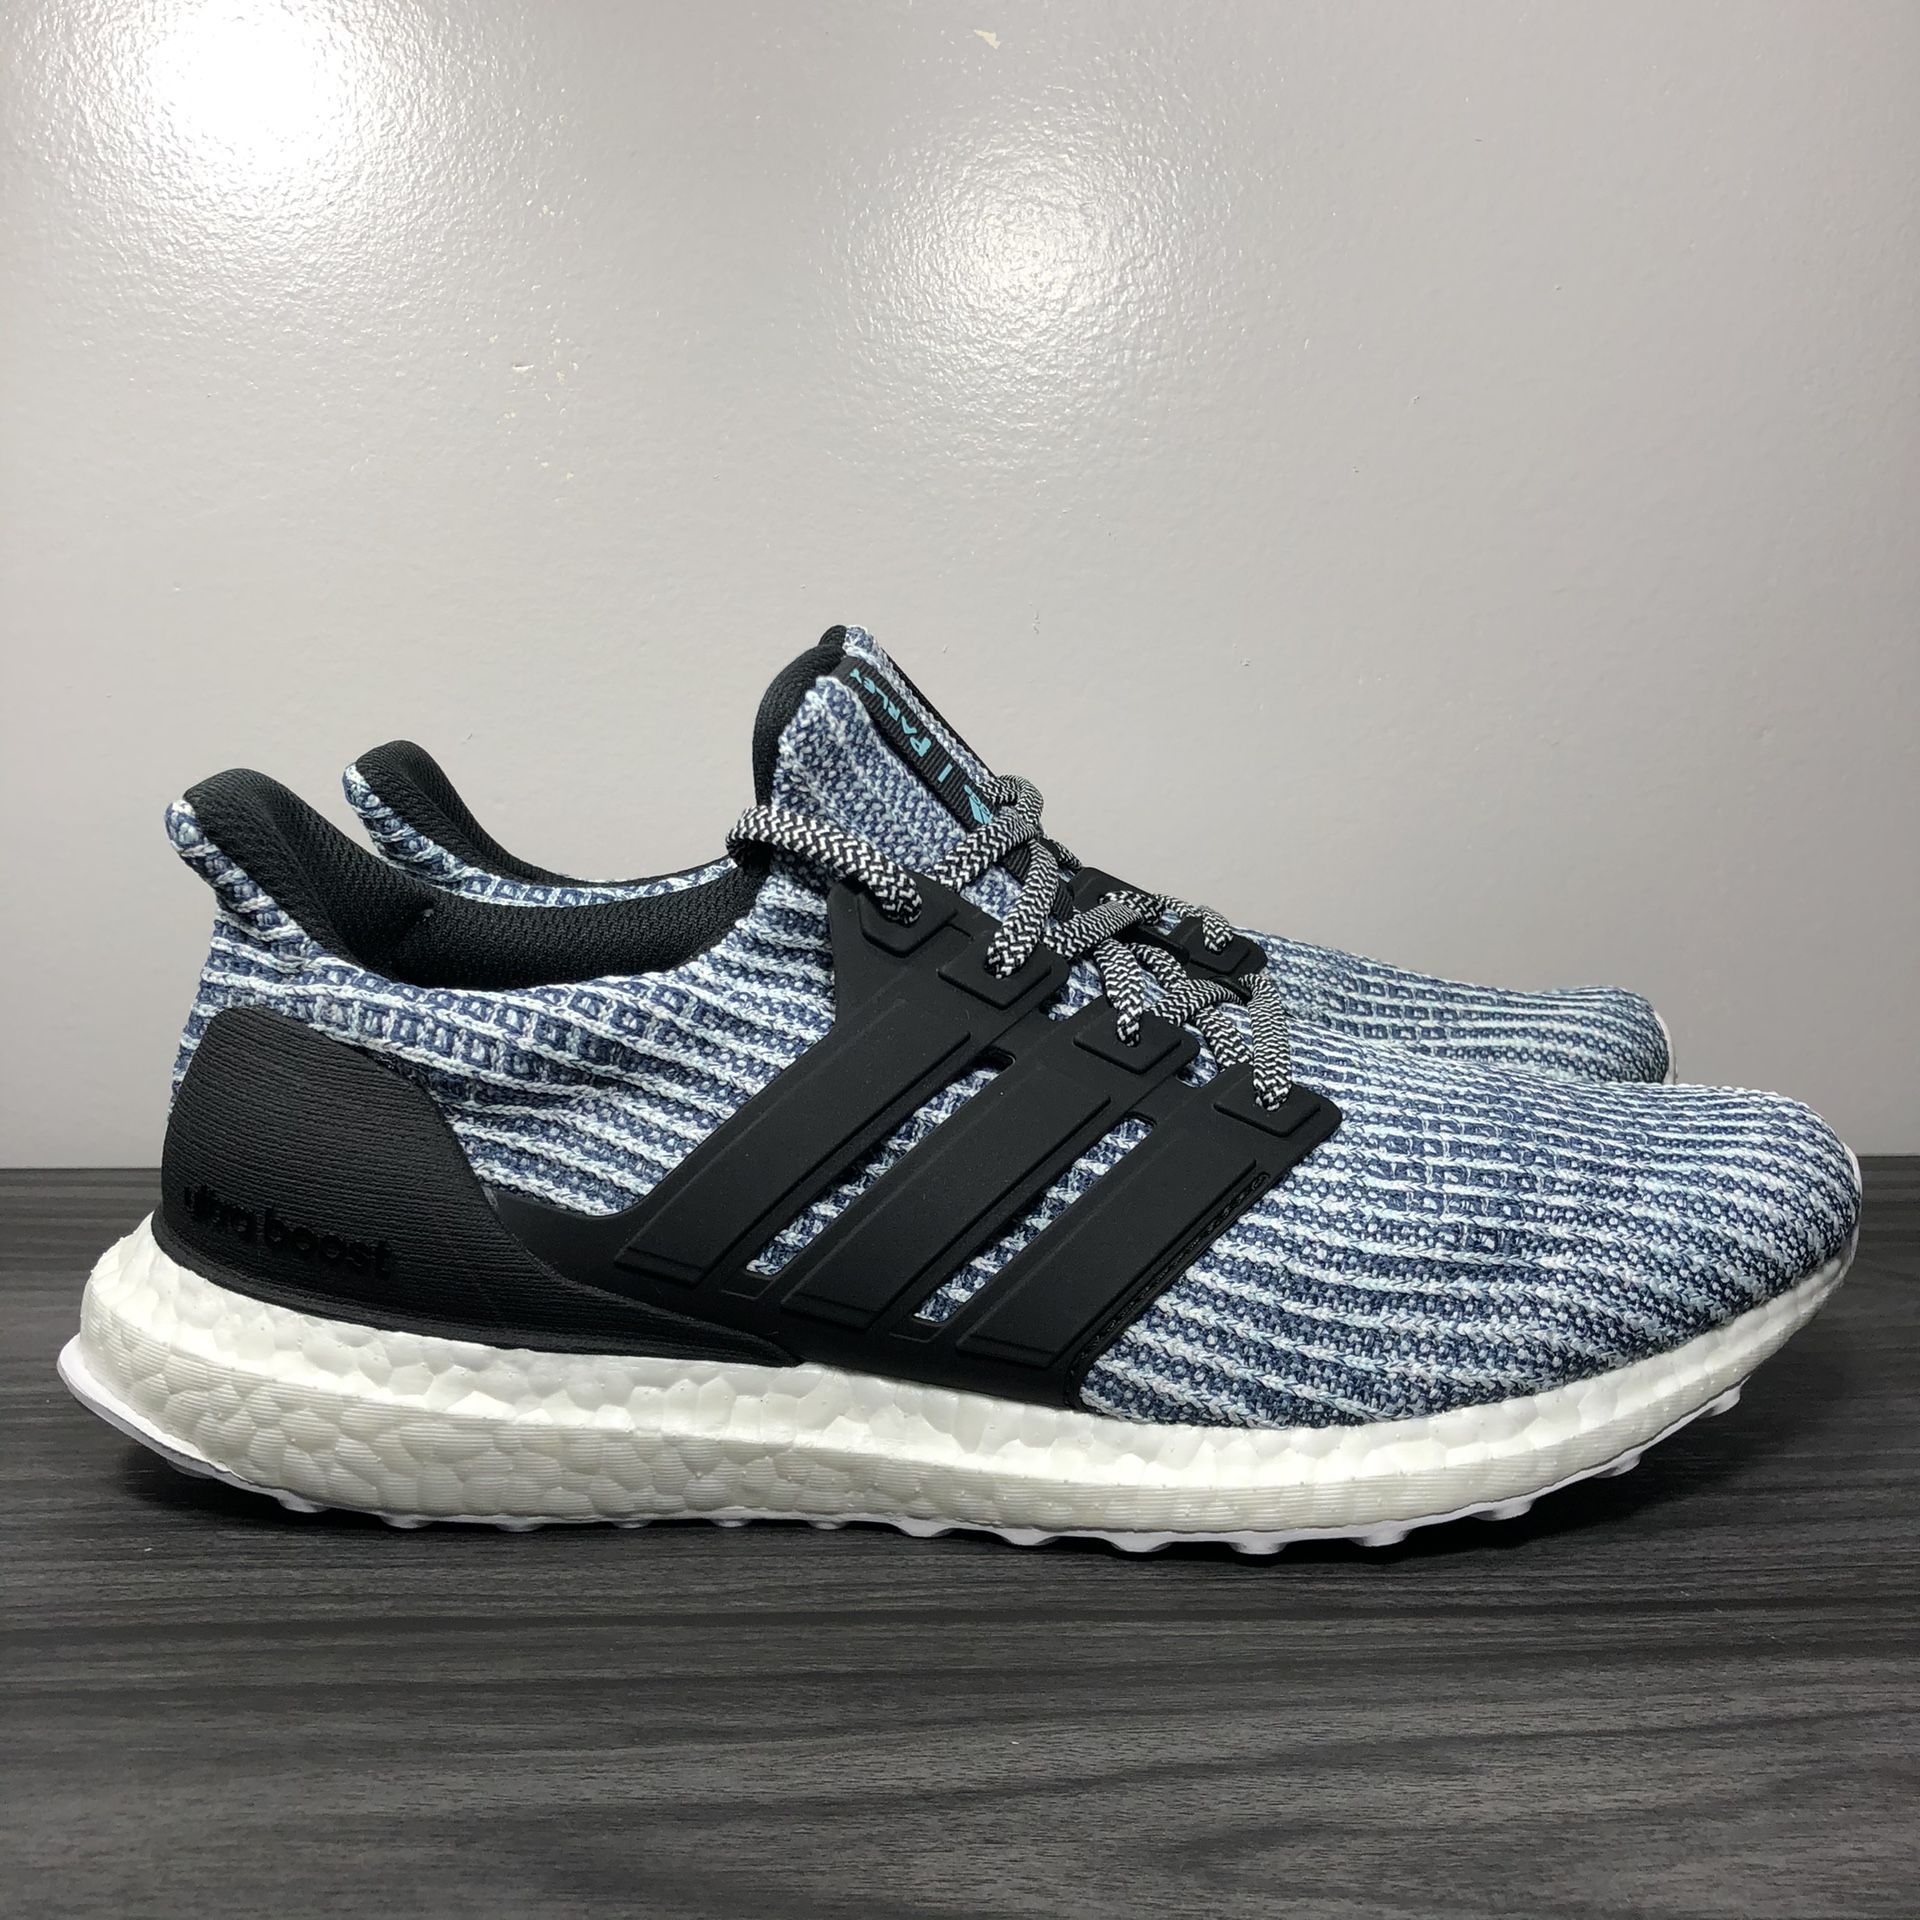 Adidas Ultra Boost 4.0 Parley White Carbon Blue